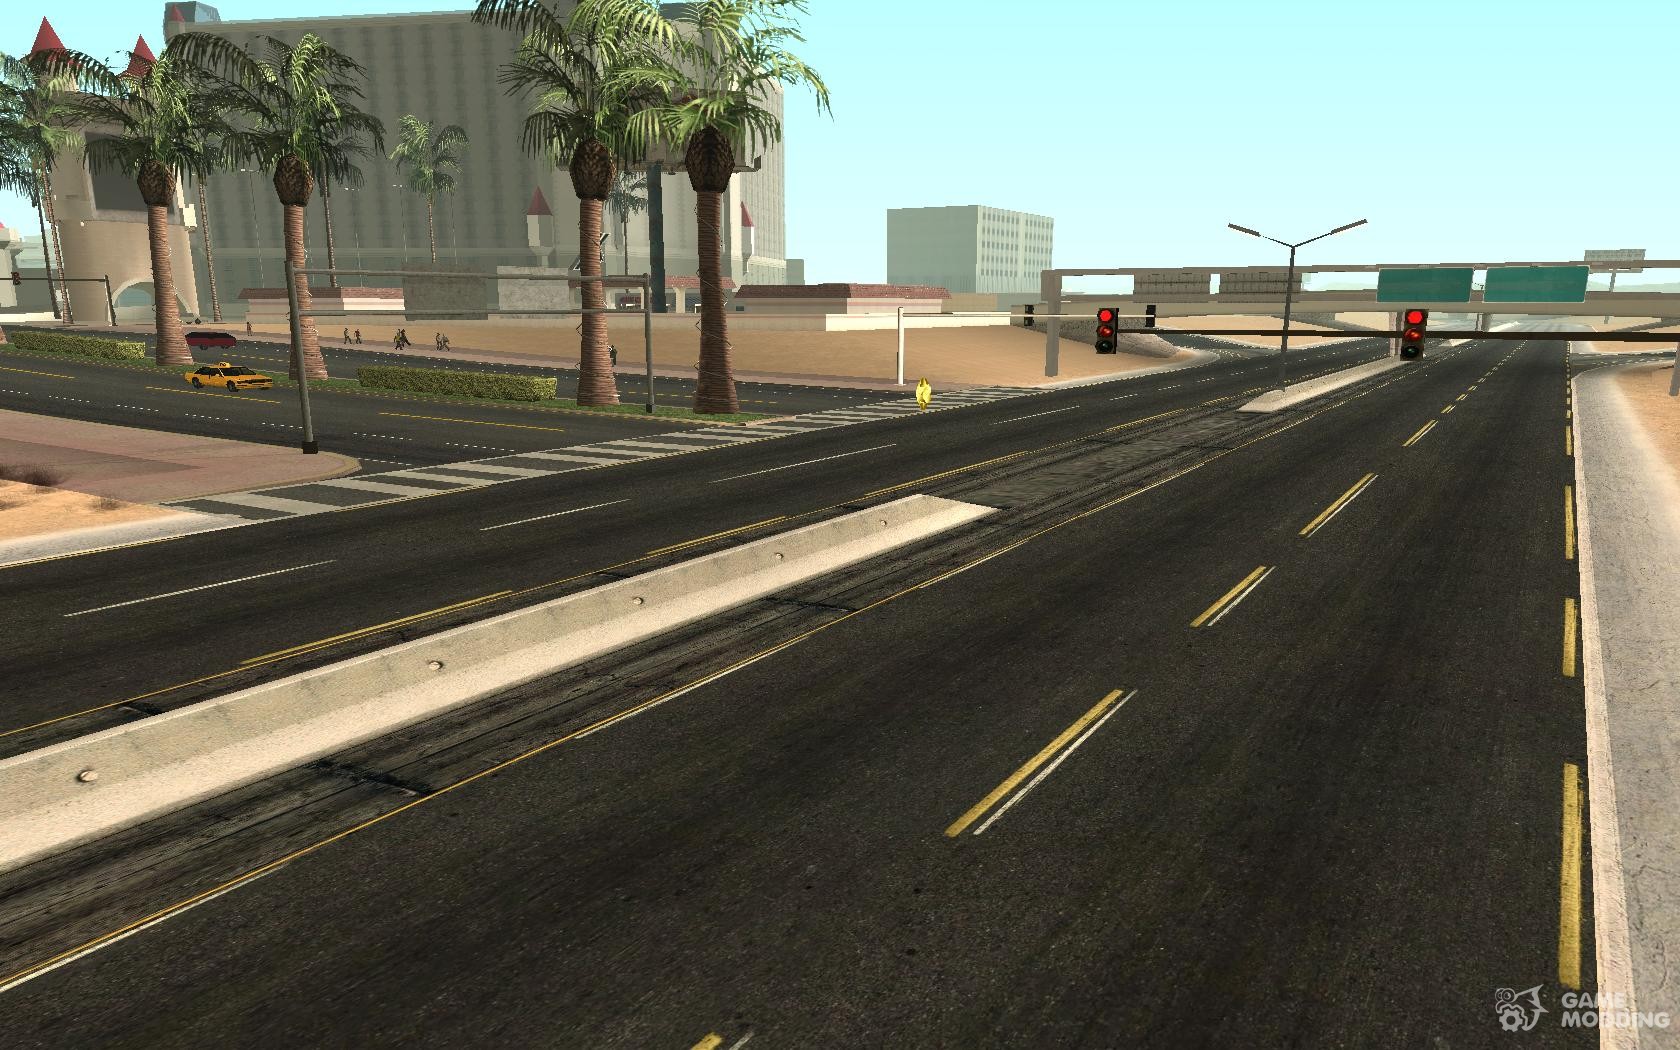 Gta Iv Road Textures By Fonia5 Download